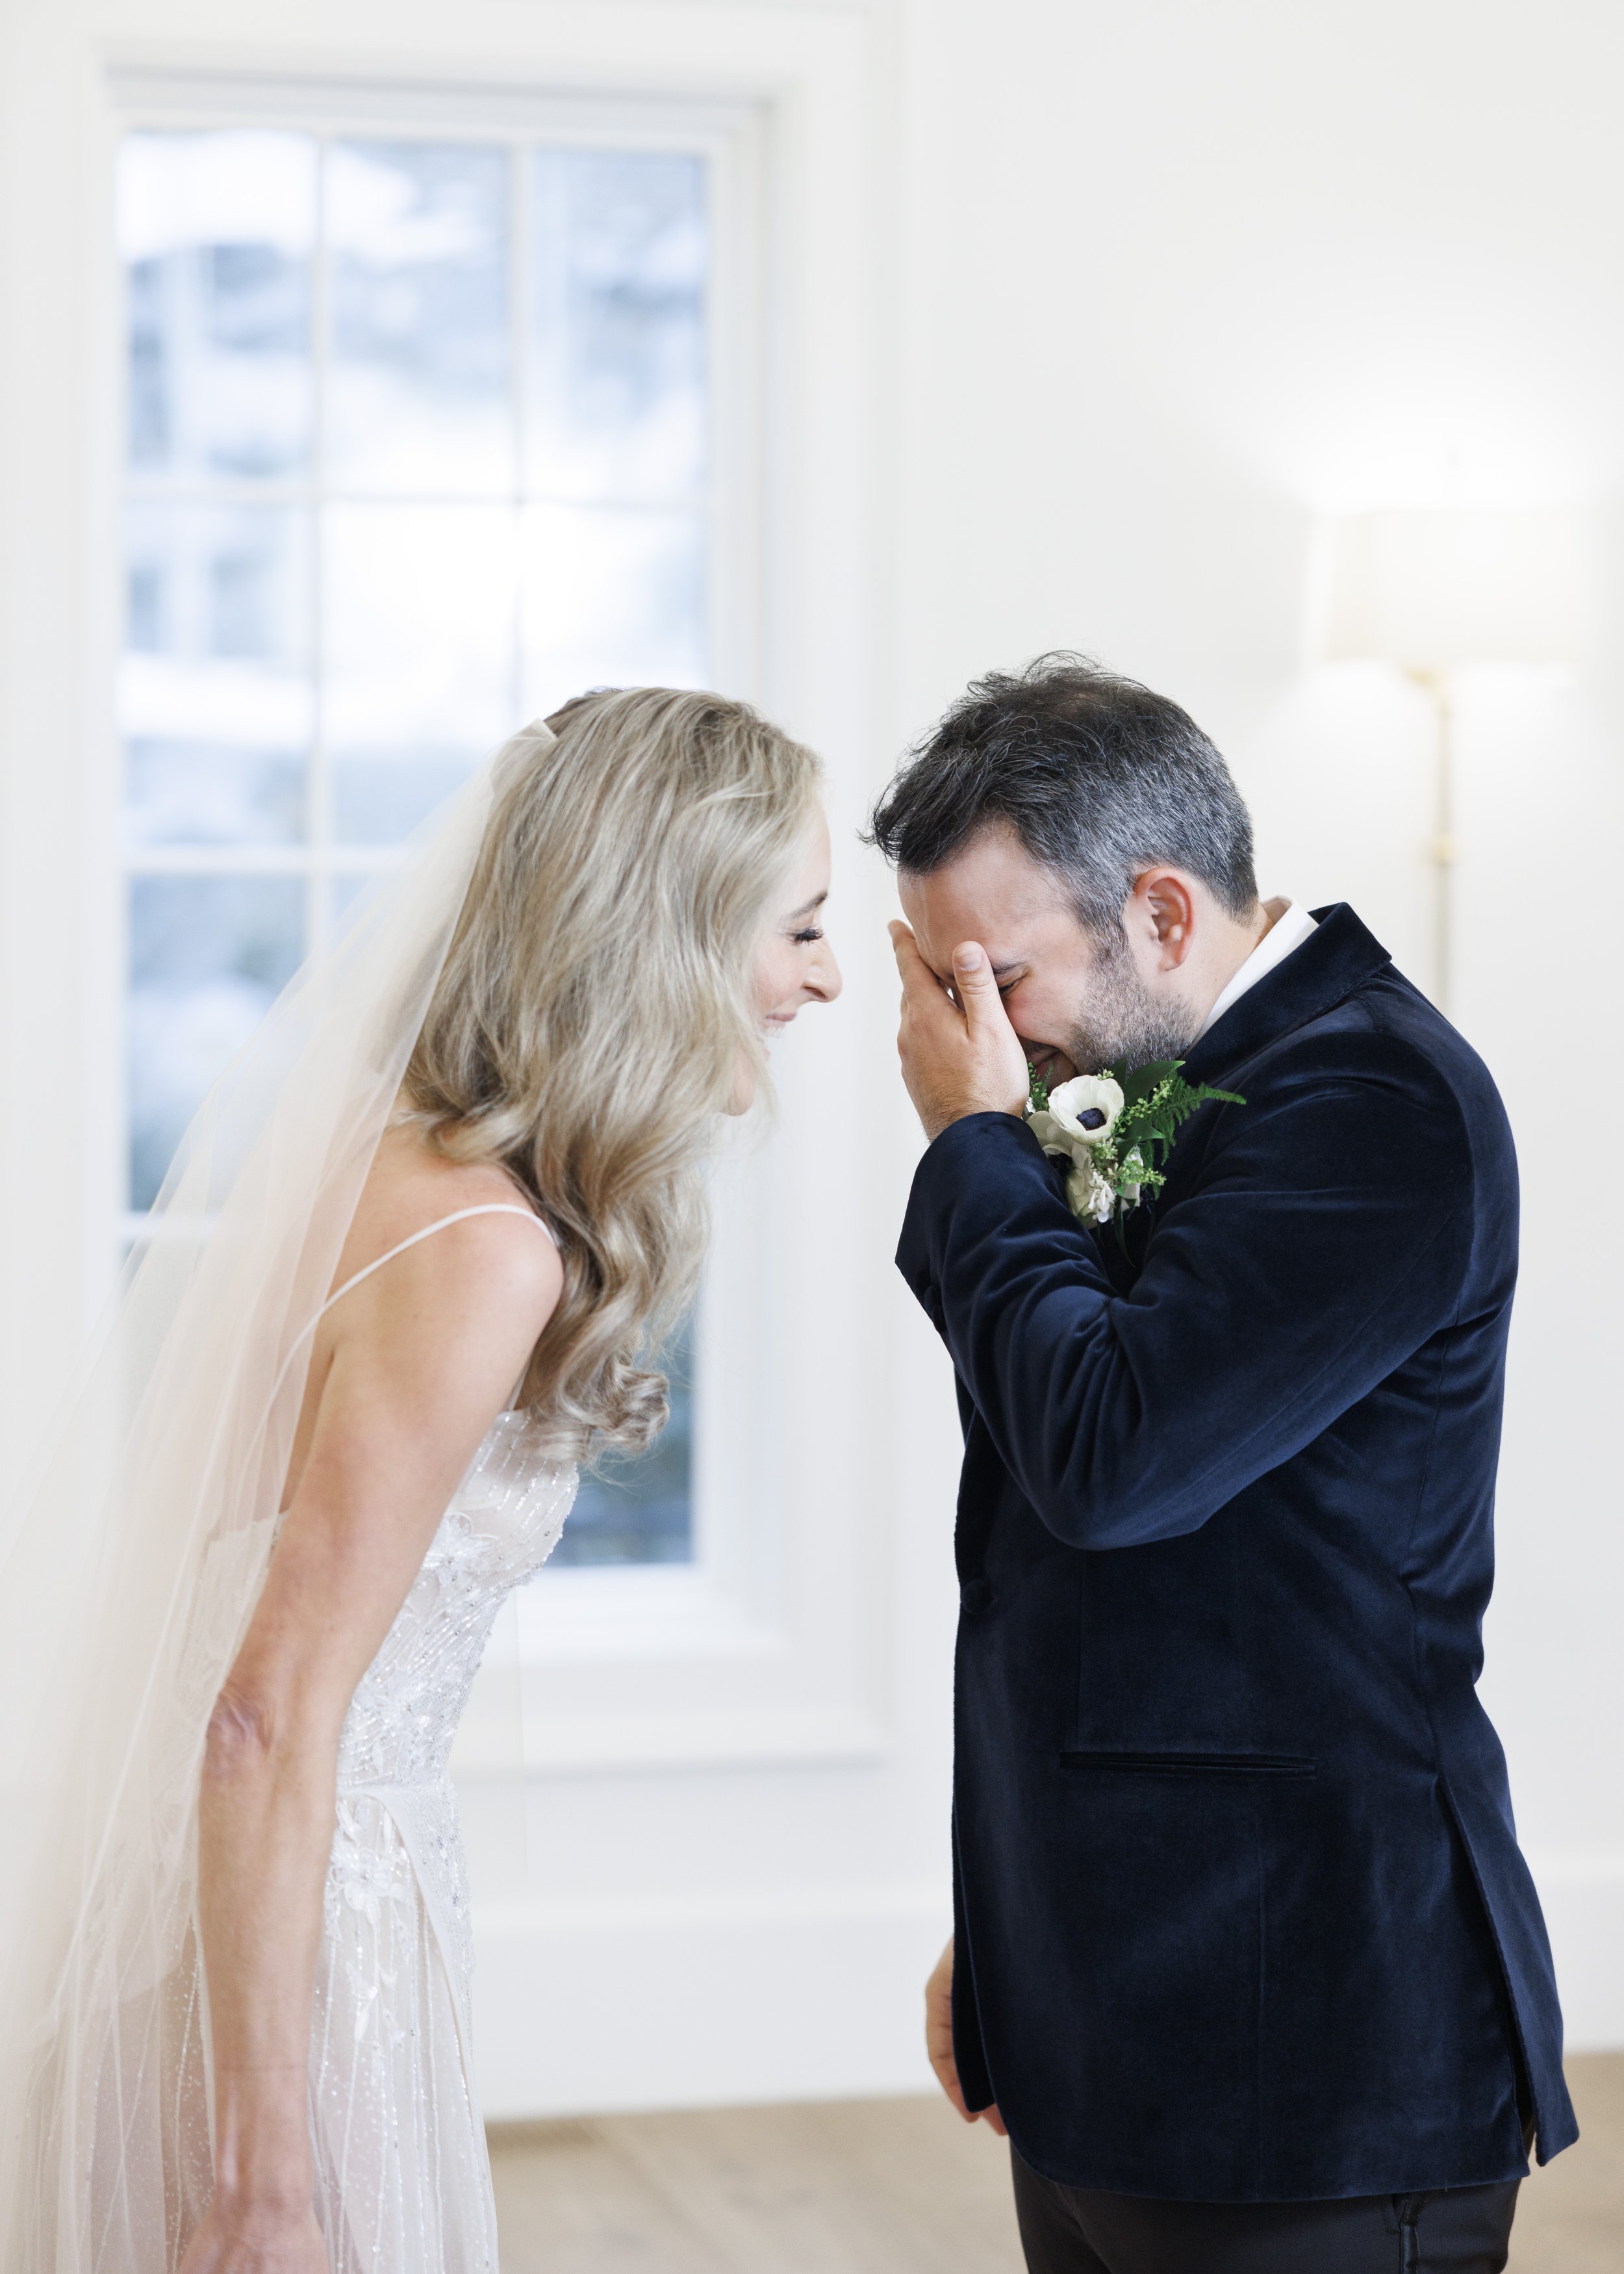  Groom covers his eyes as he waits to see his bride, by Savanna Richardson Photography a wedding photographer. first glance #SavannaRichardsonPhotography #SavannaRichardsonWeddings #NYEwedding #magicalwedding #snowywedding #holidaywedding #married 